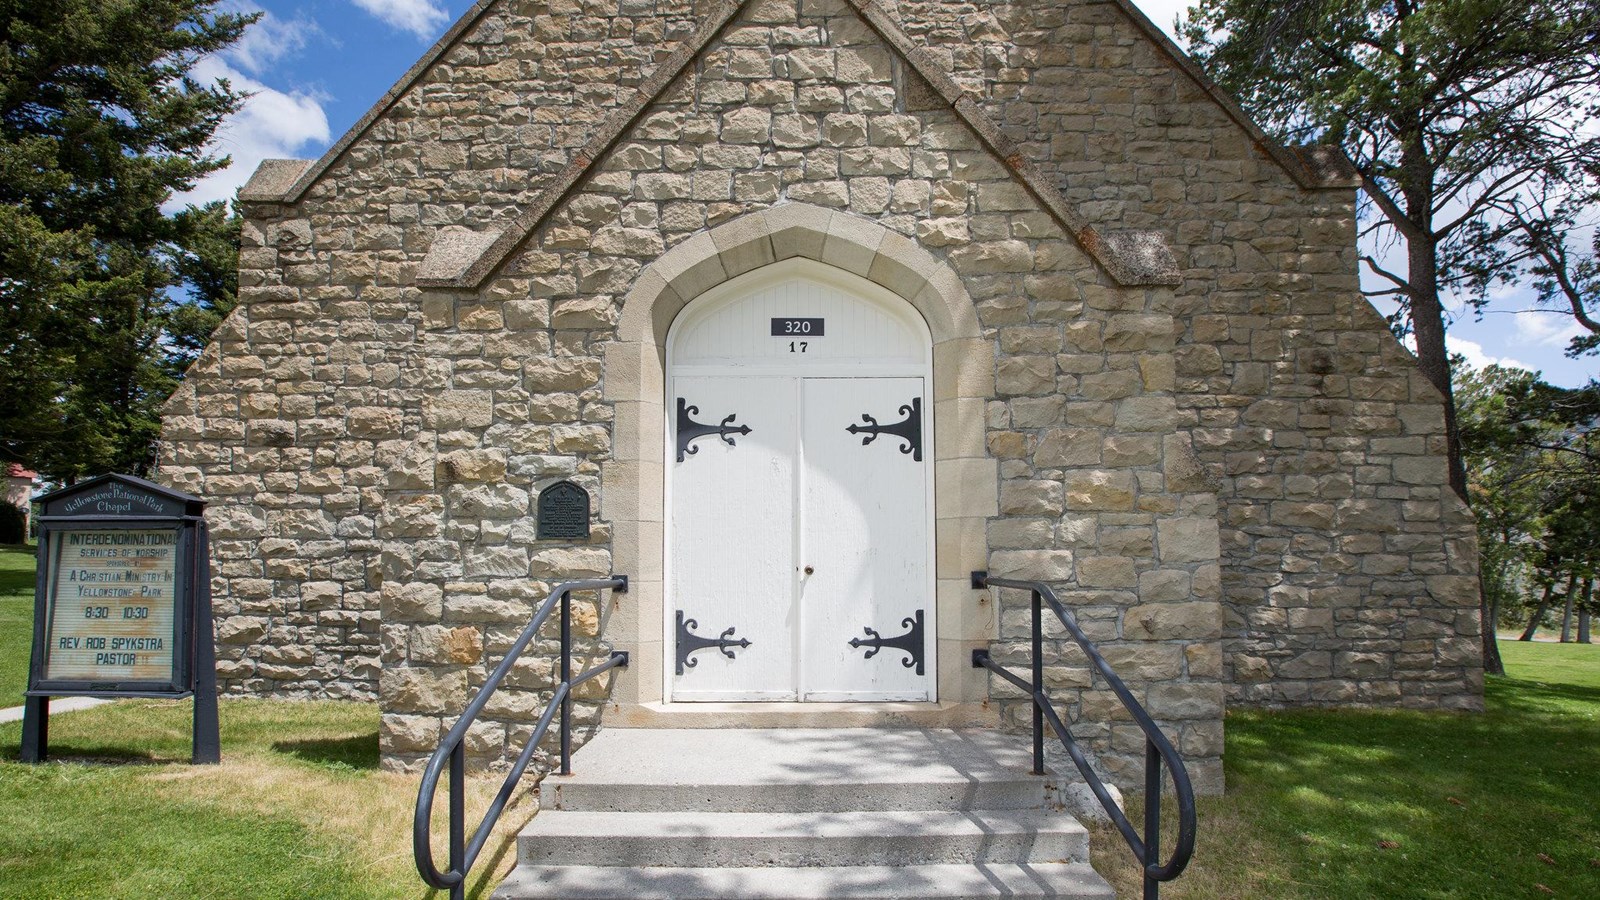 The front doors of a historic stone chapel building.